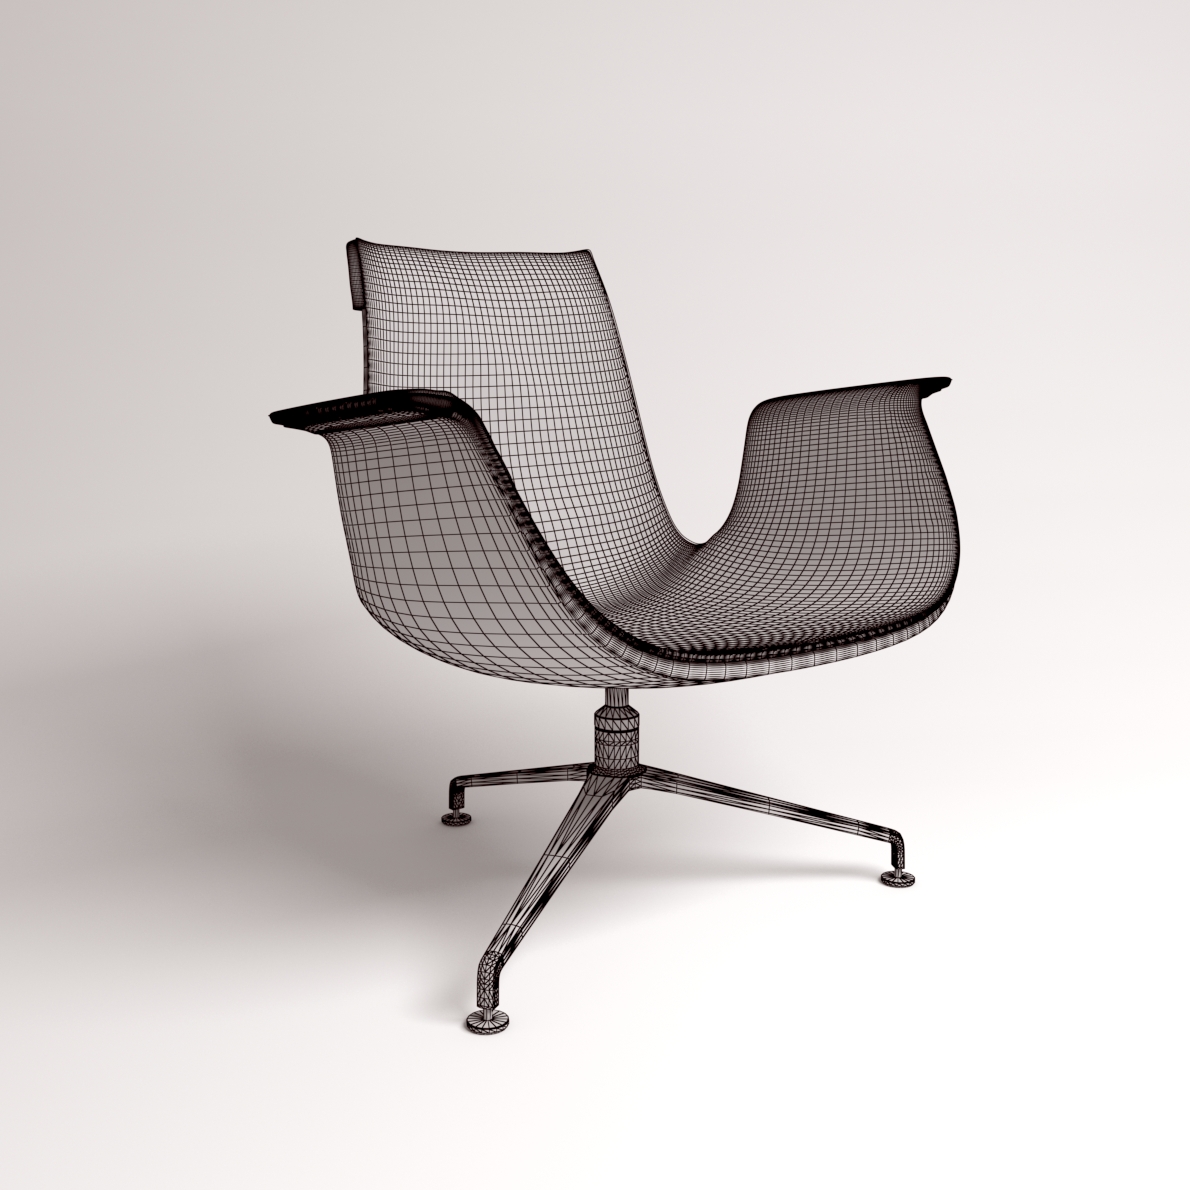 Bulbo Lounge Chair By Louis Vuitton - 3D Model for VRay, Corona